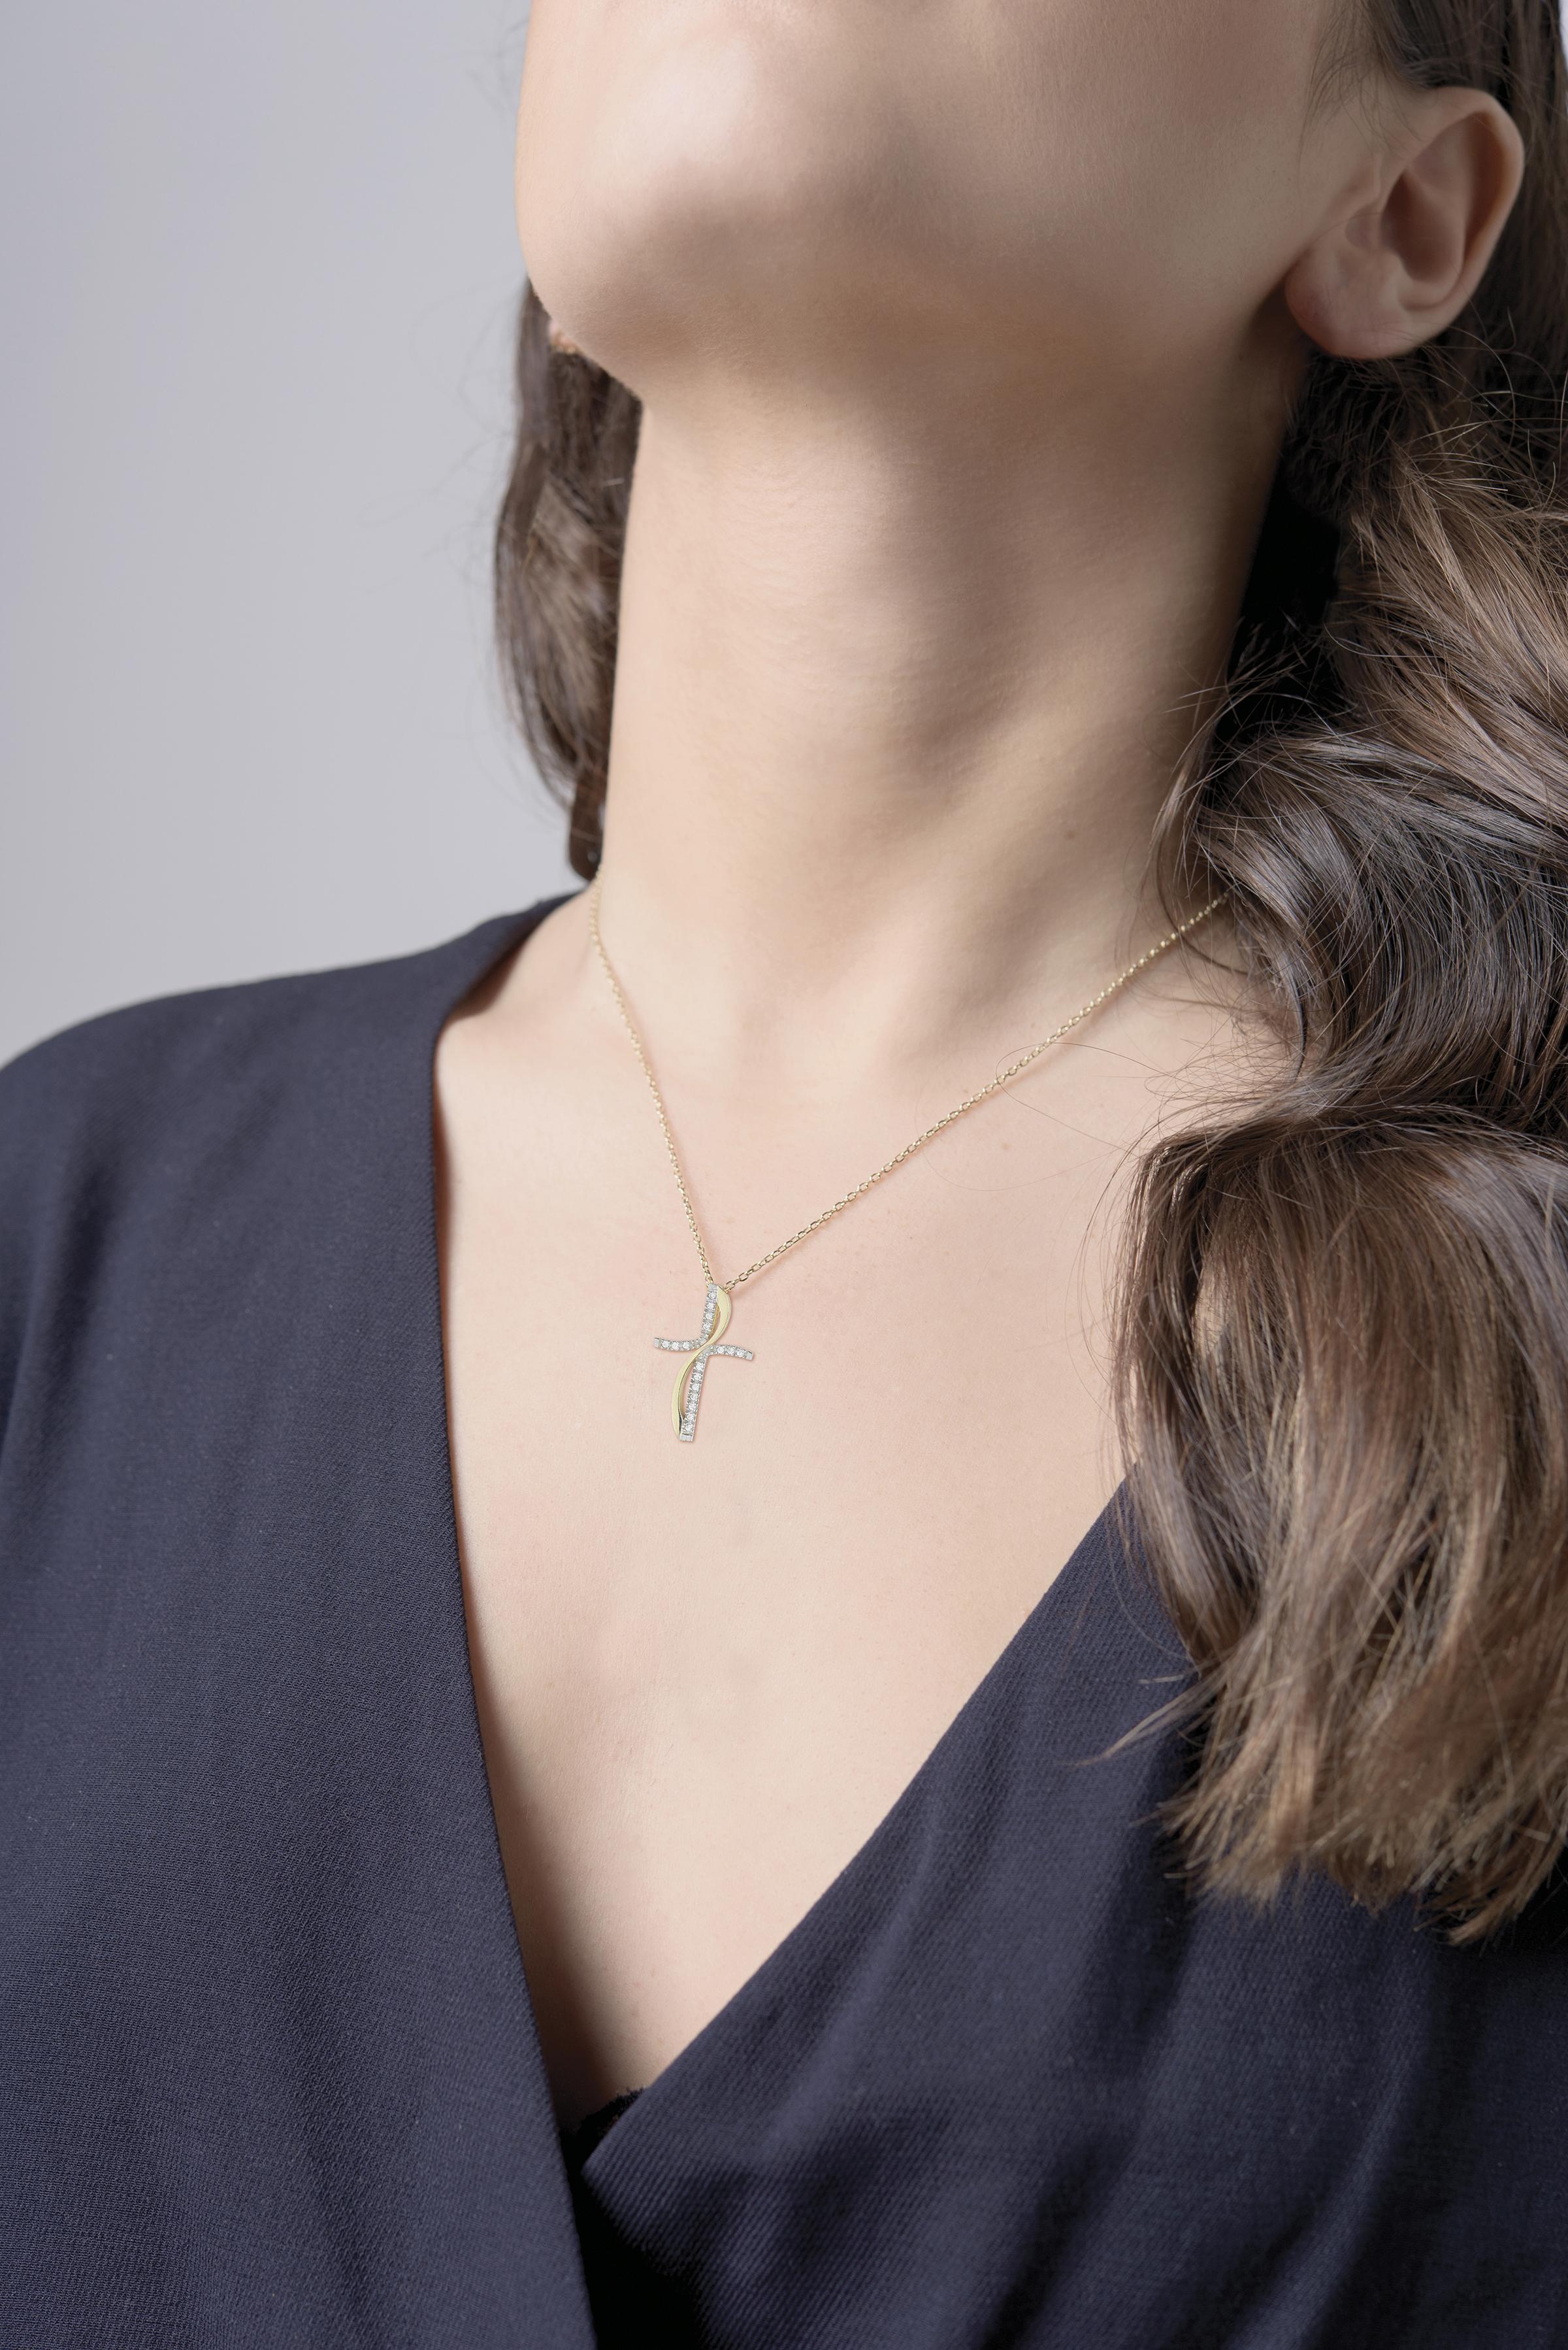 30mm Methodist Cross Necklace - Pendant Necklace In Silver